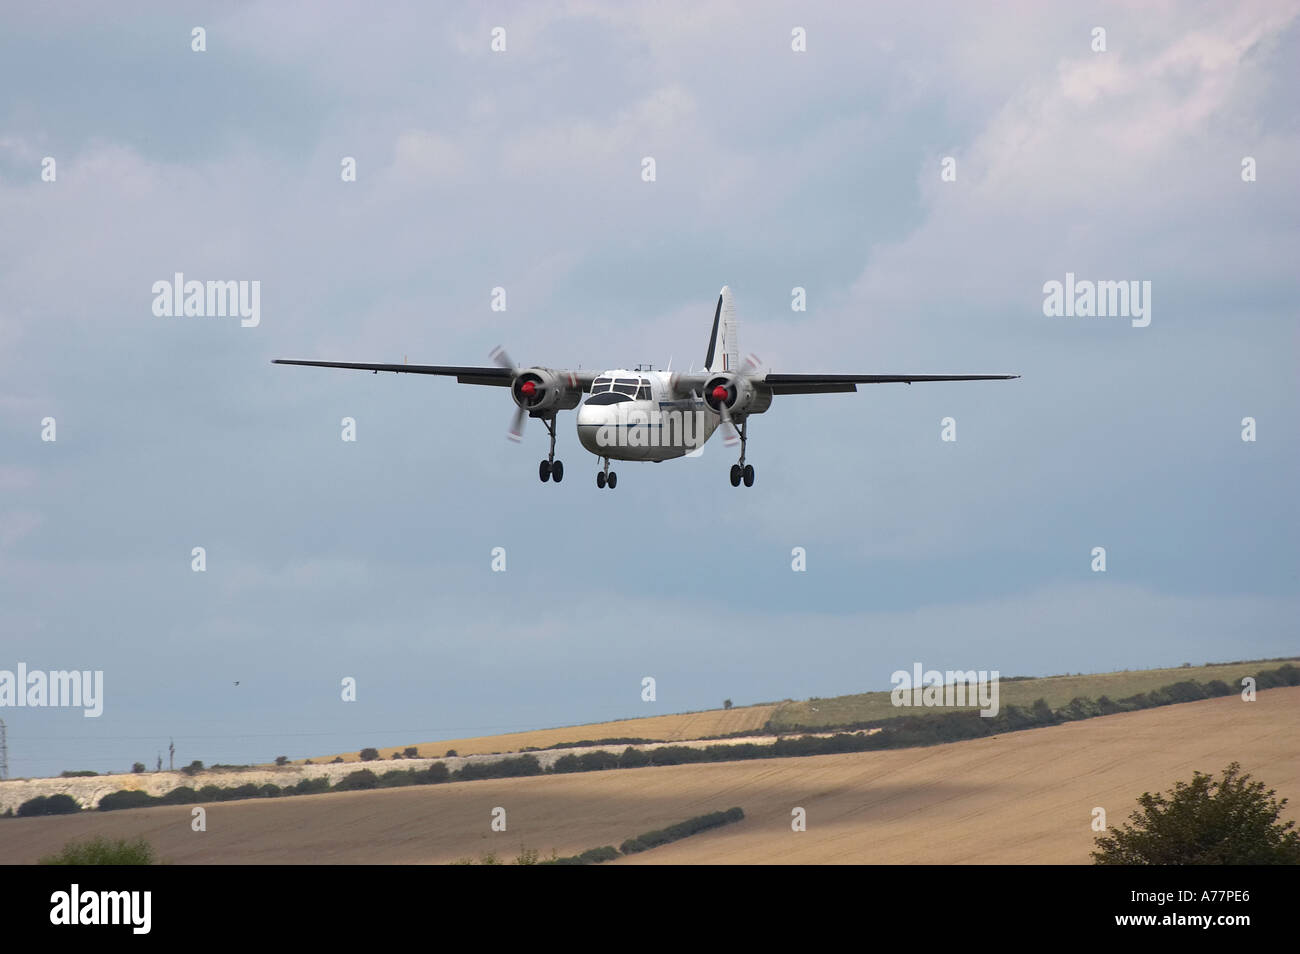 Percival Pembroke WV-740 plane coming into land at Shoreham airshow, Sussex, England Stock Photo